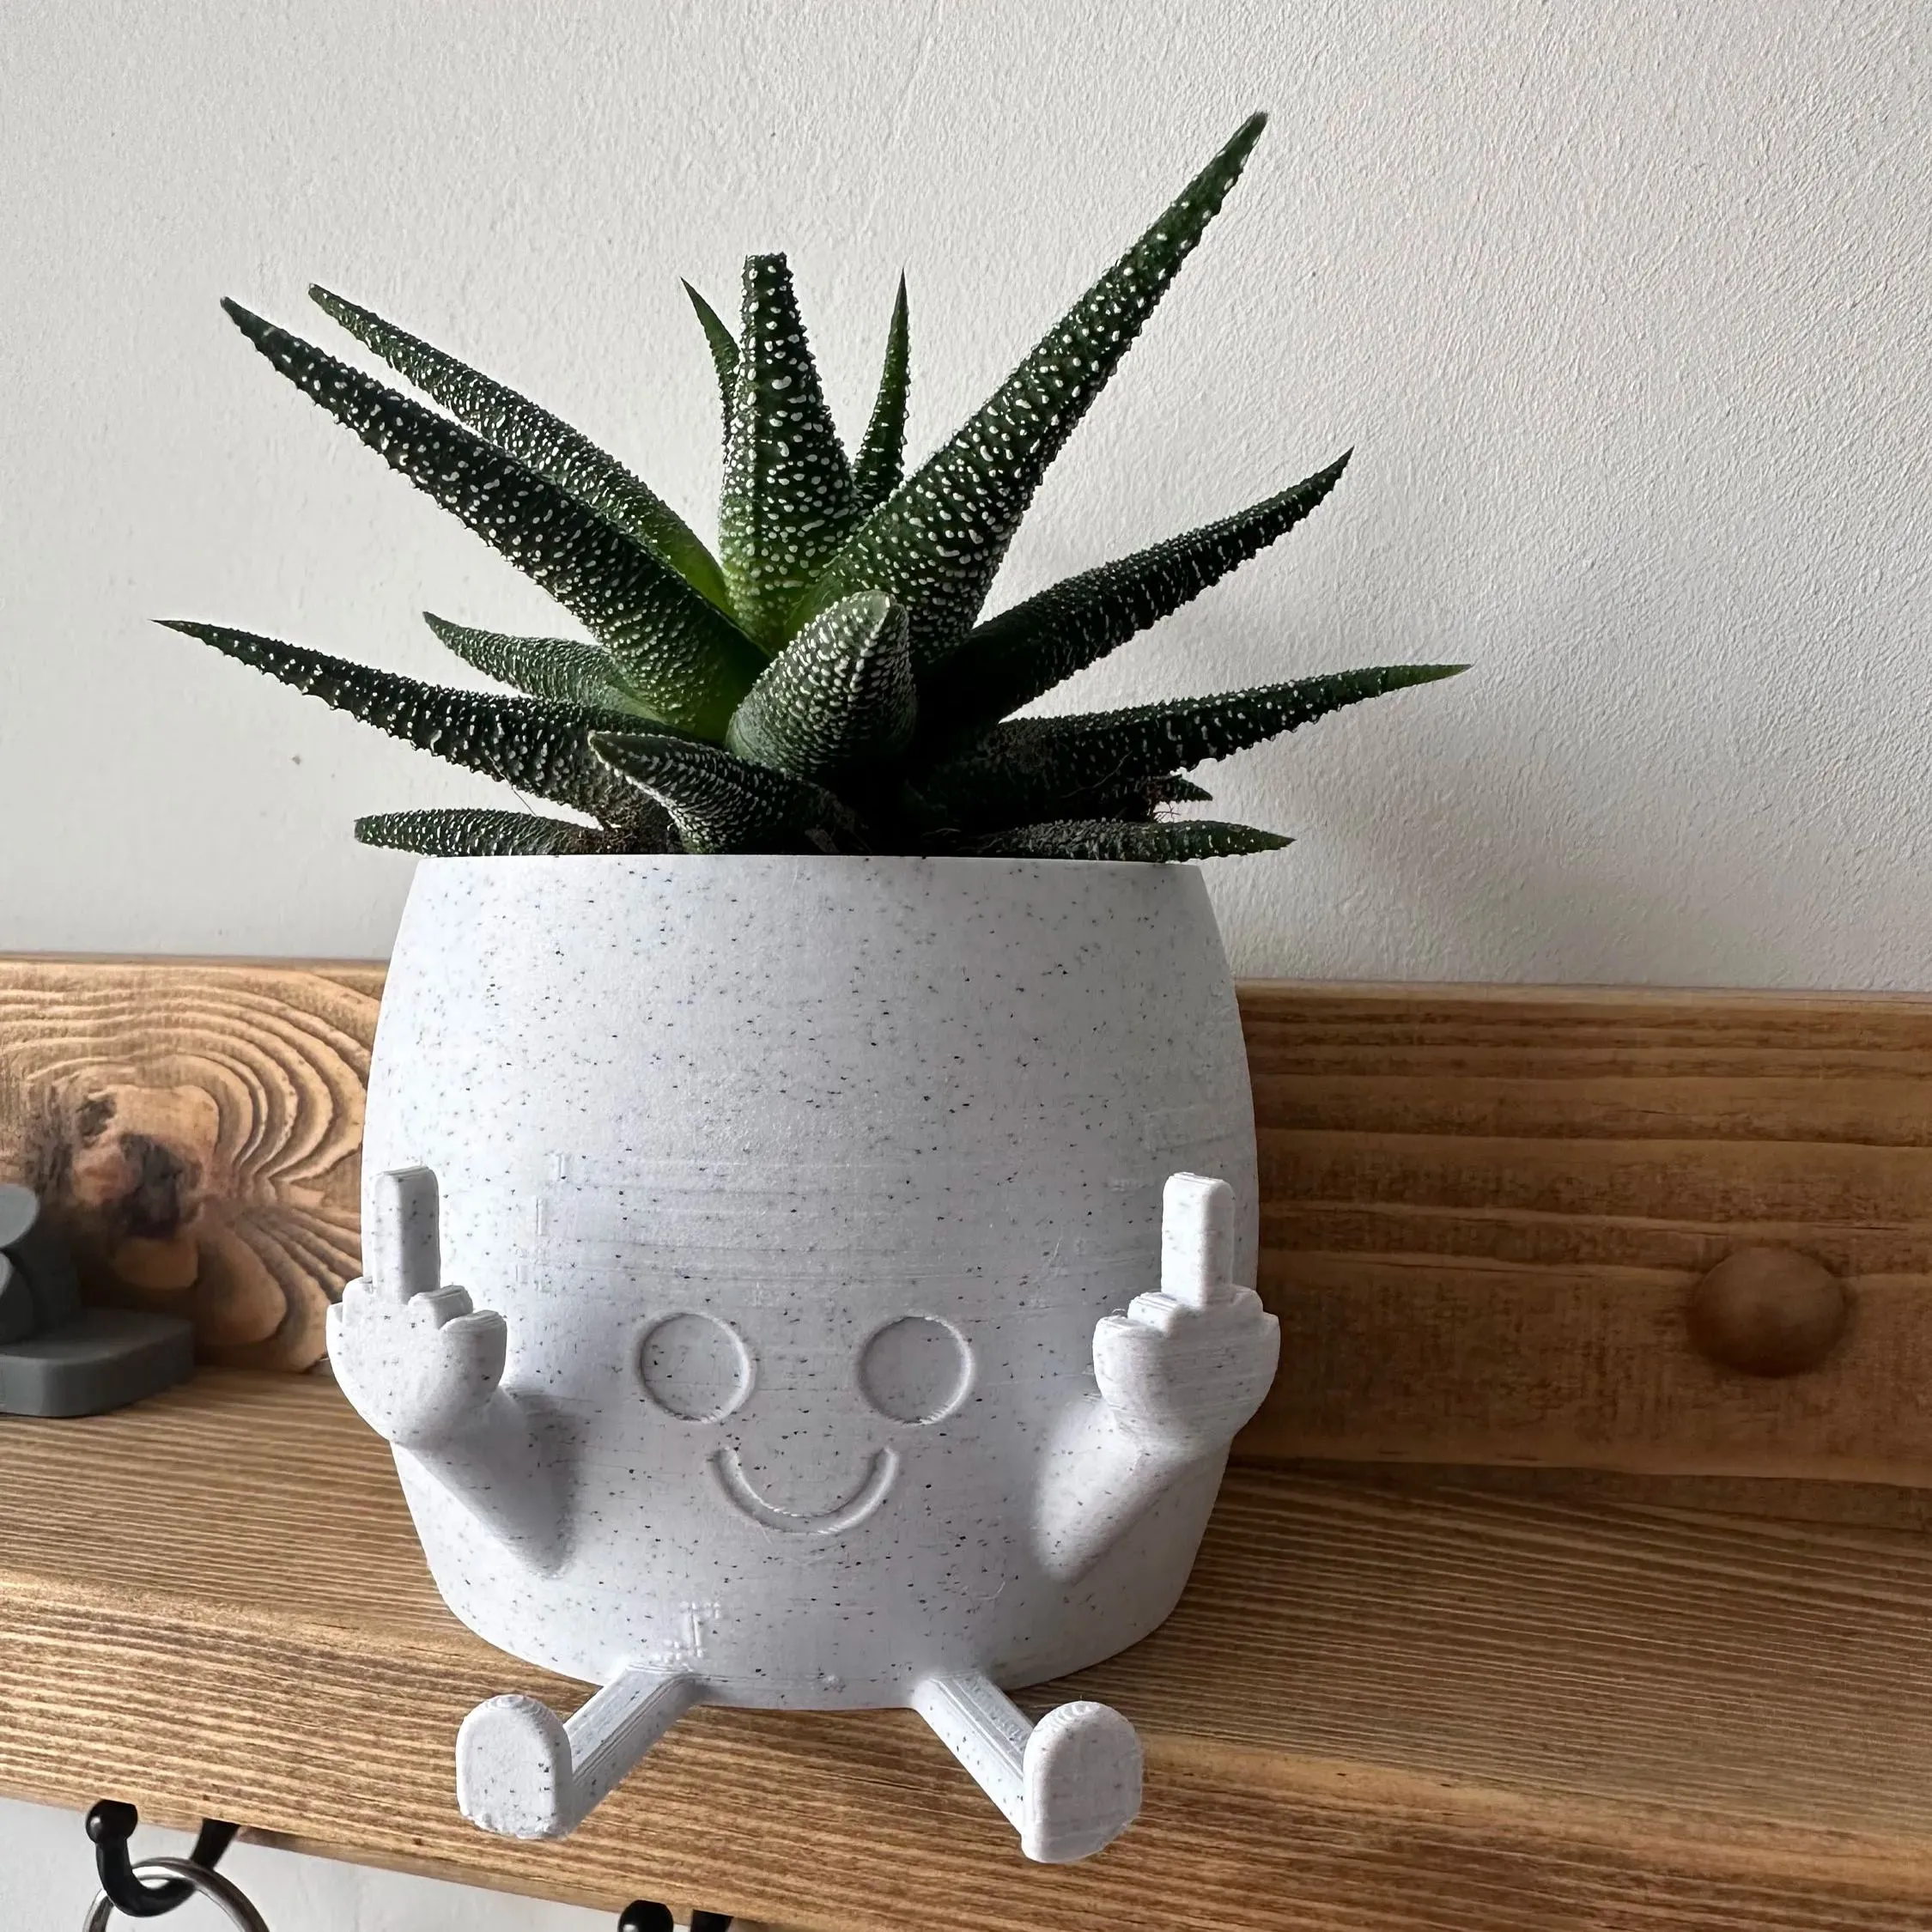 🤣3D Printed Planter with Middle Finger Smiling Up